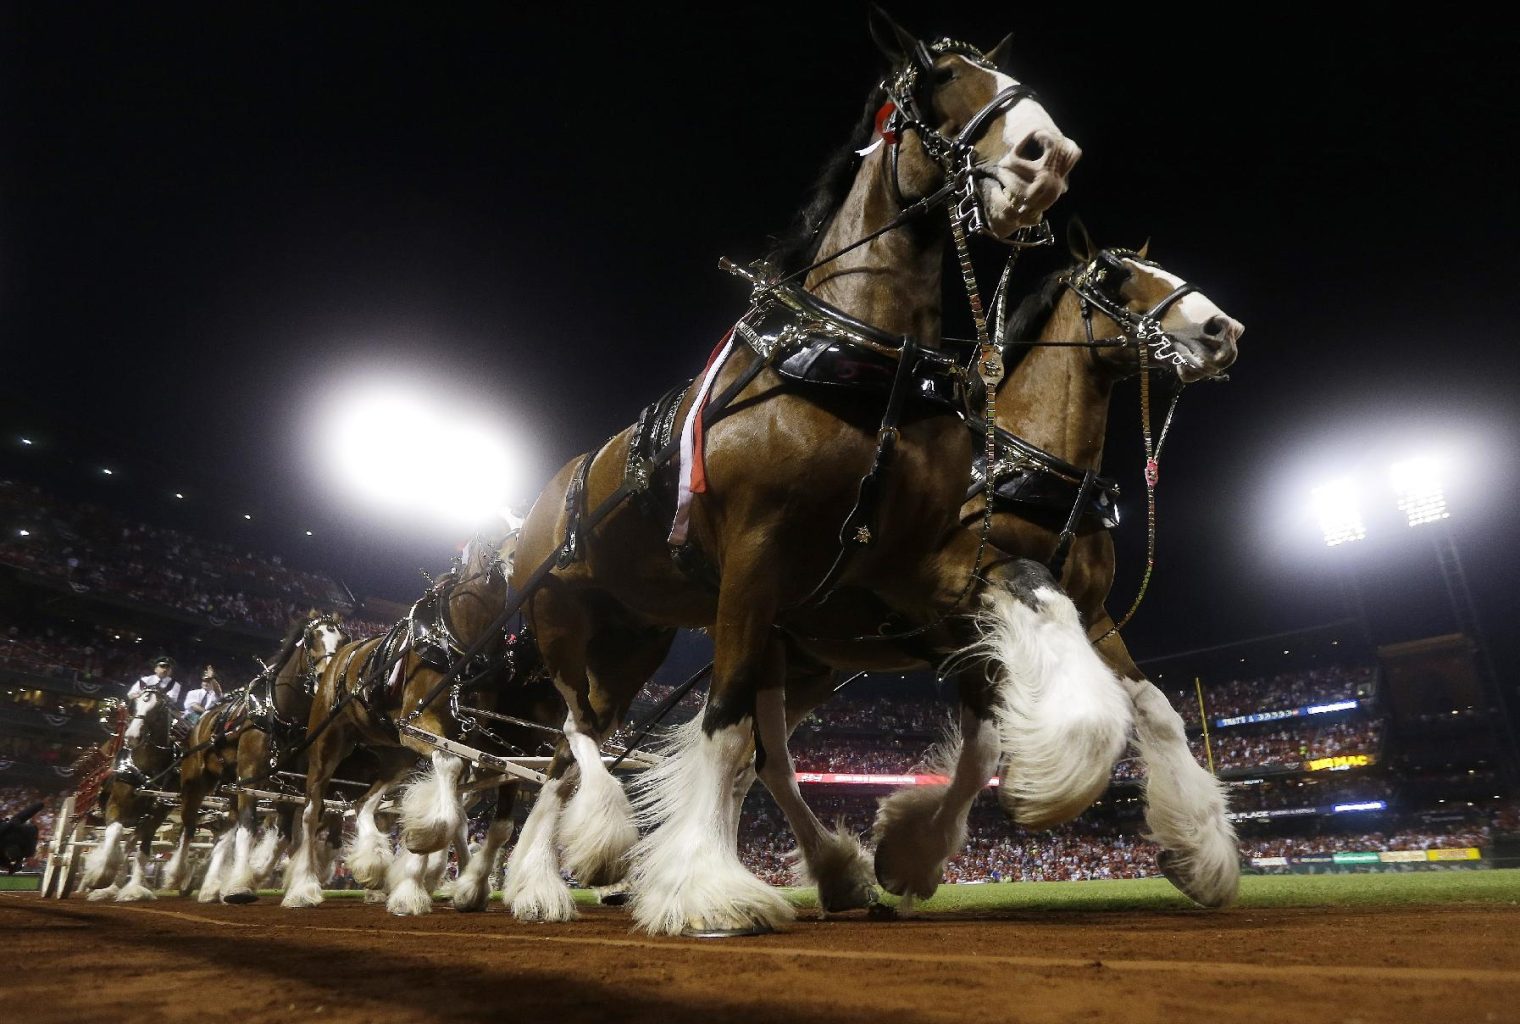 The Budweiser Clydesdales make their way around the field before Game